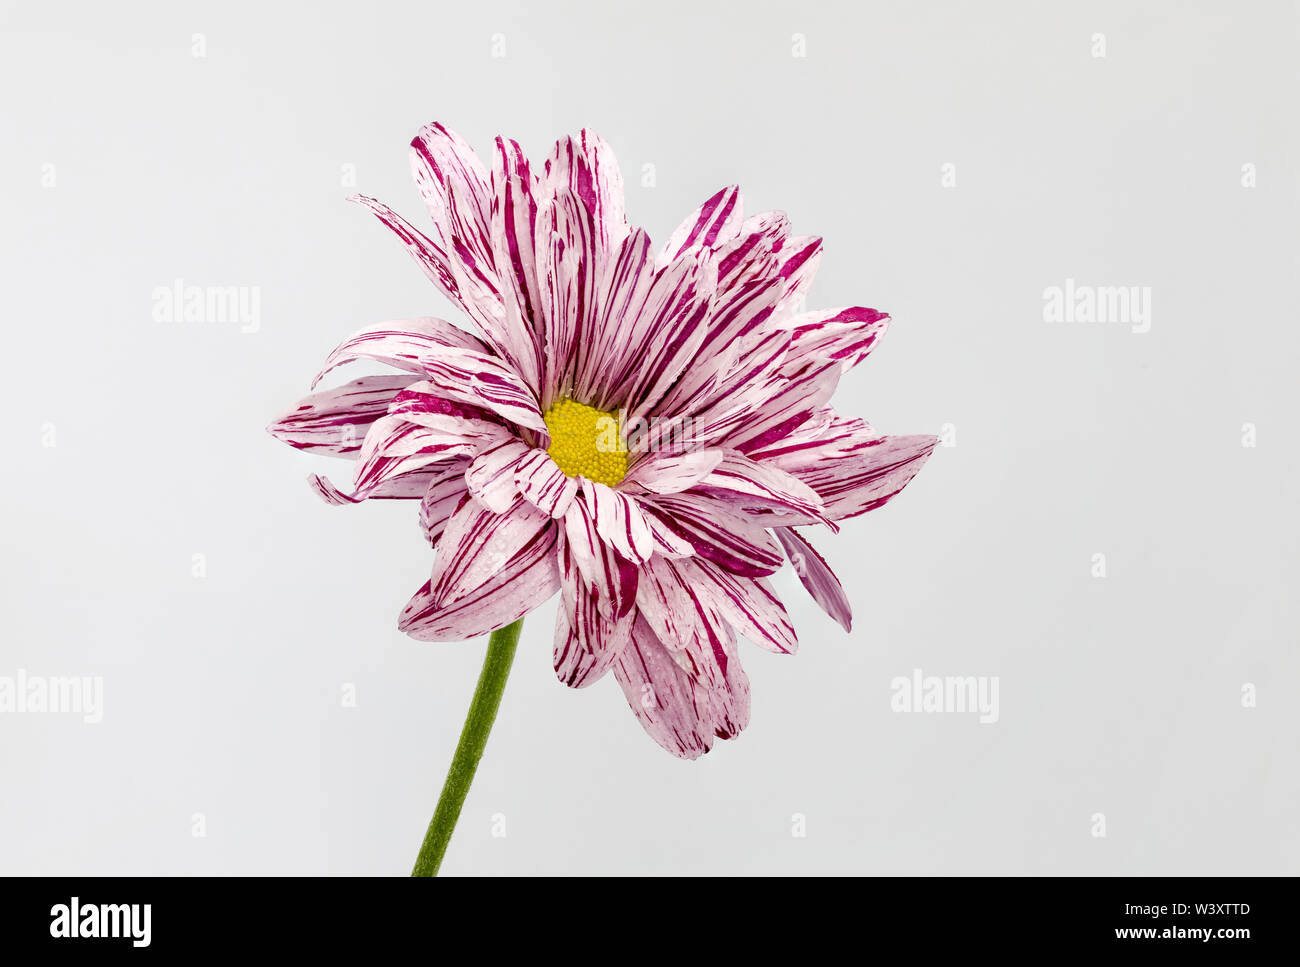 Focus Stacked Chrysanthemum flower isolated on a white background Stock Photo